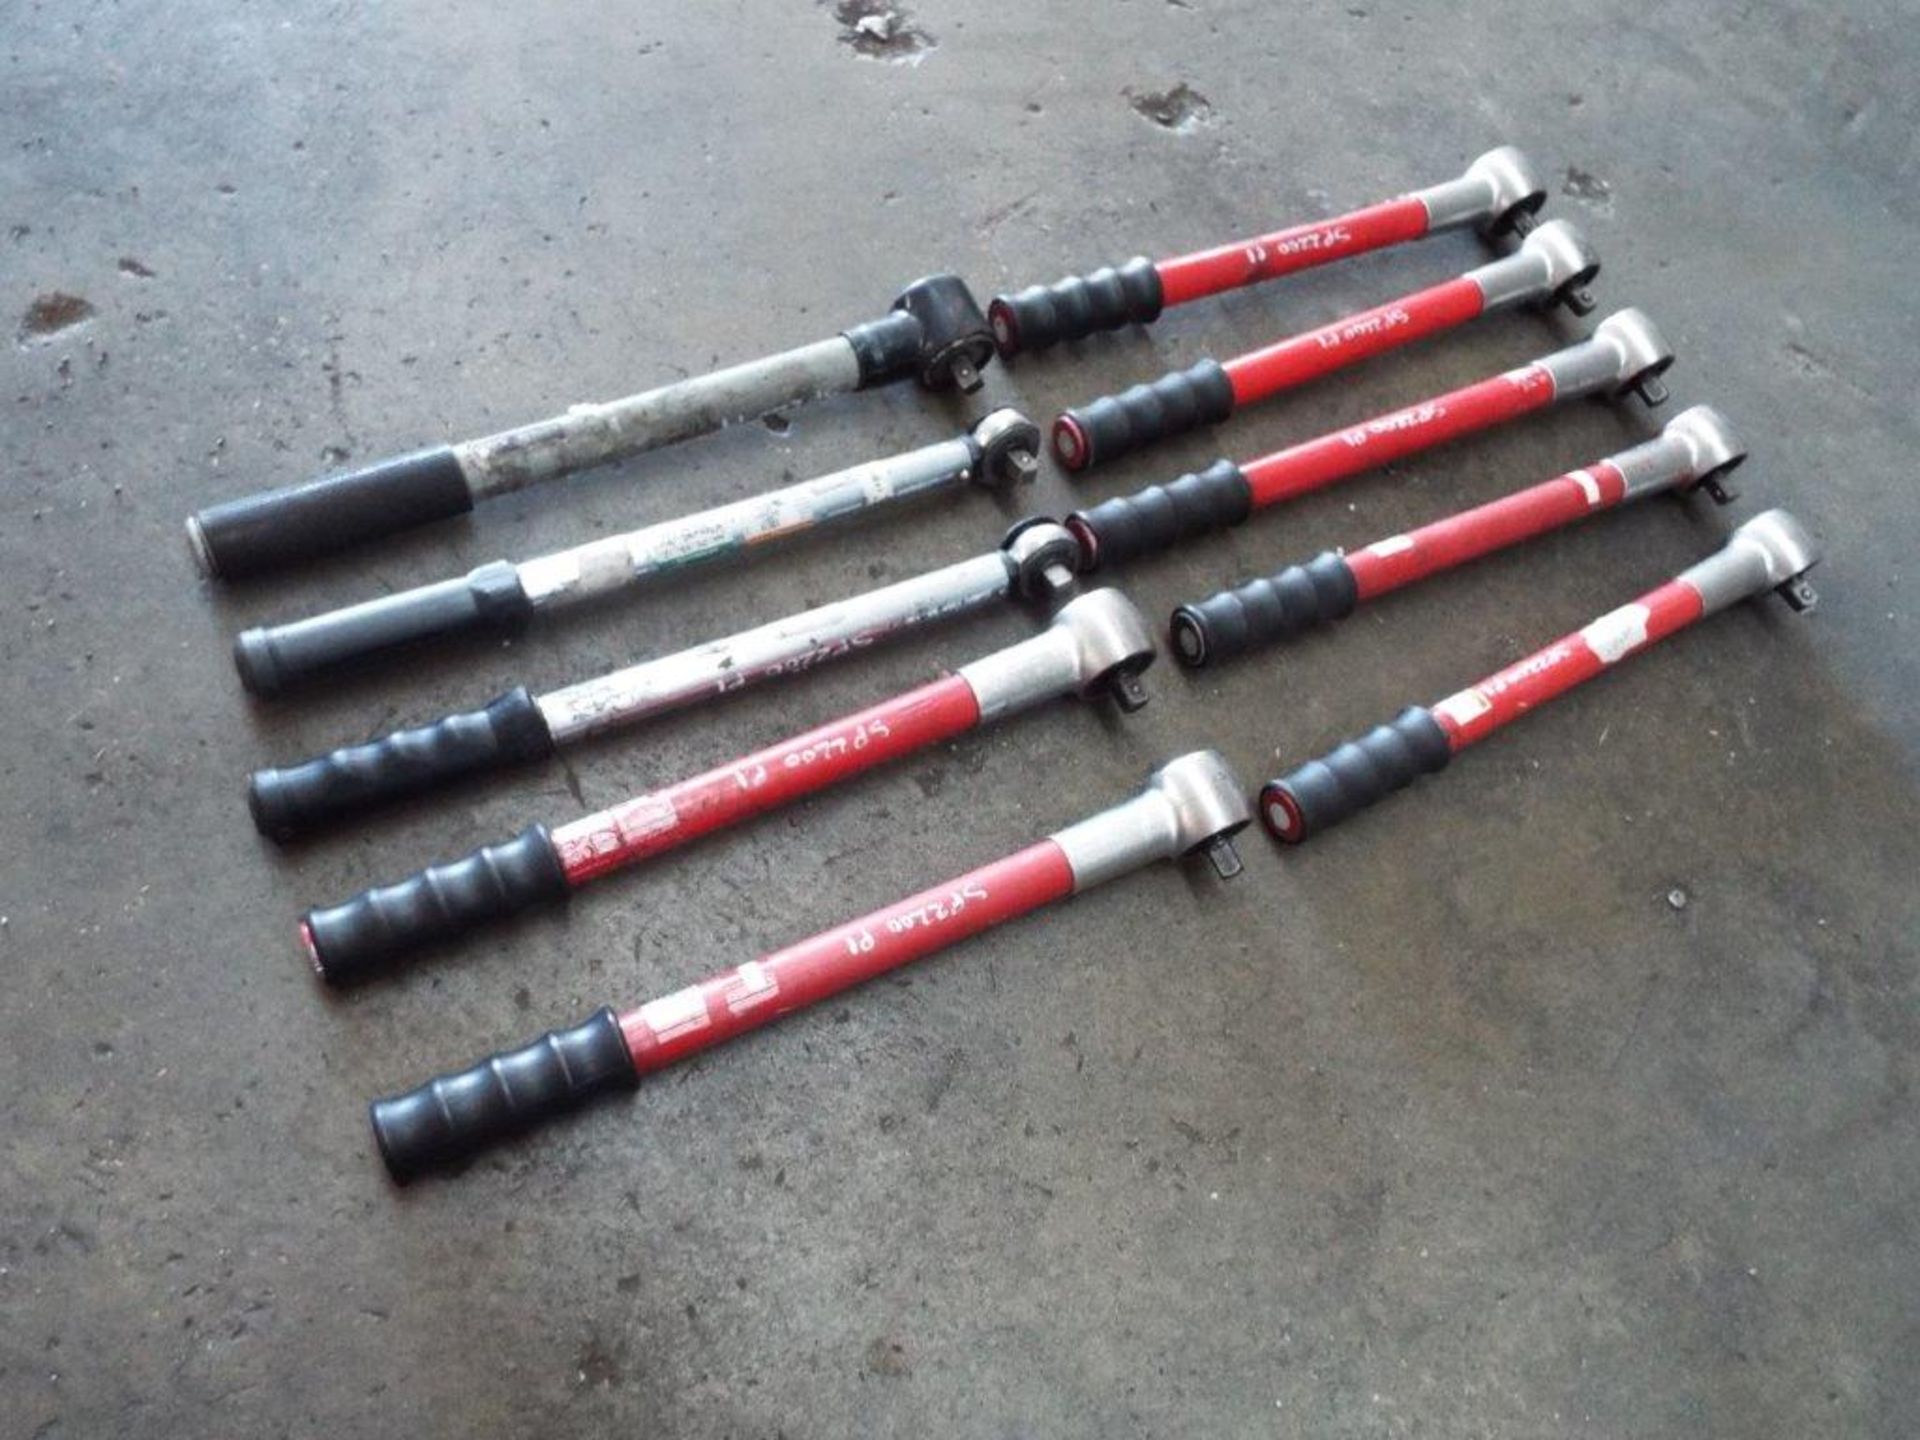 10 x Mixed Torque Wrenches